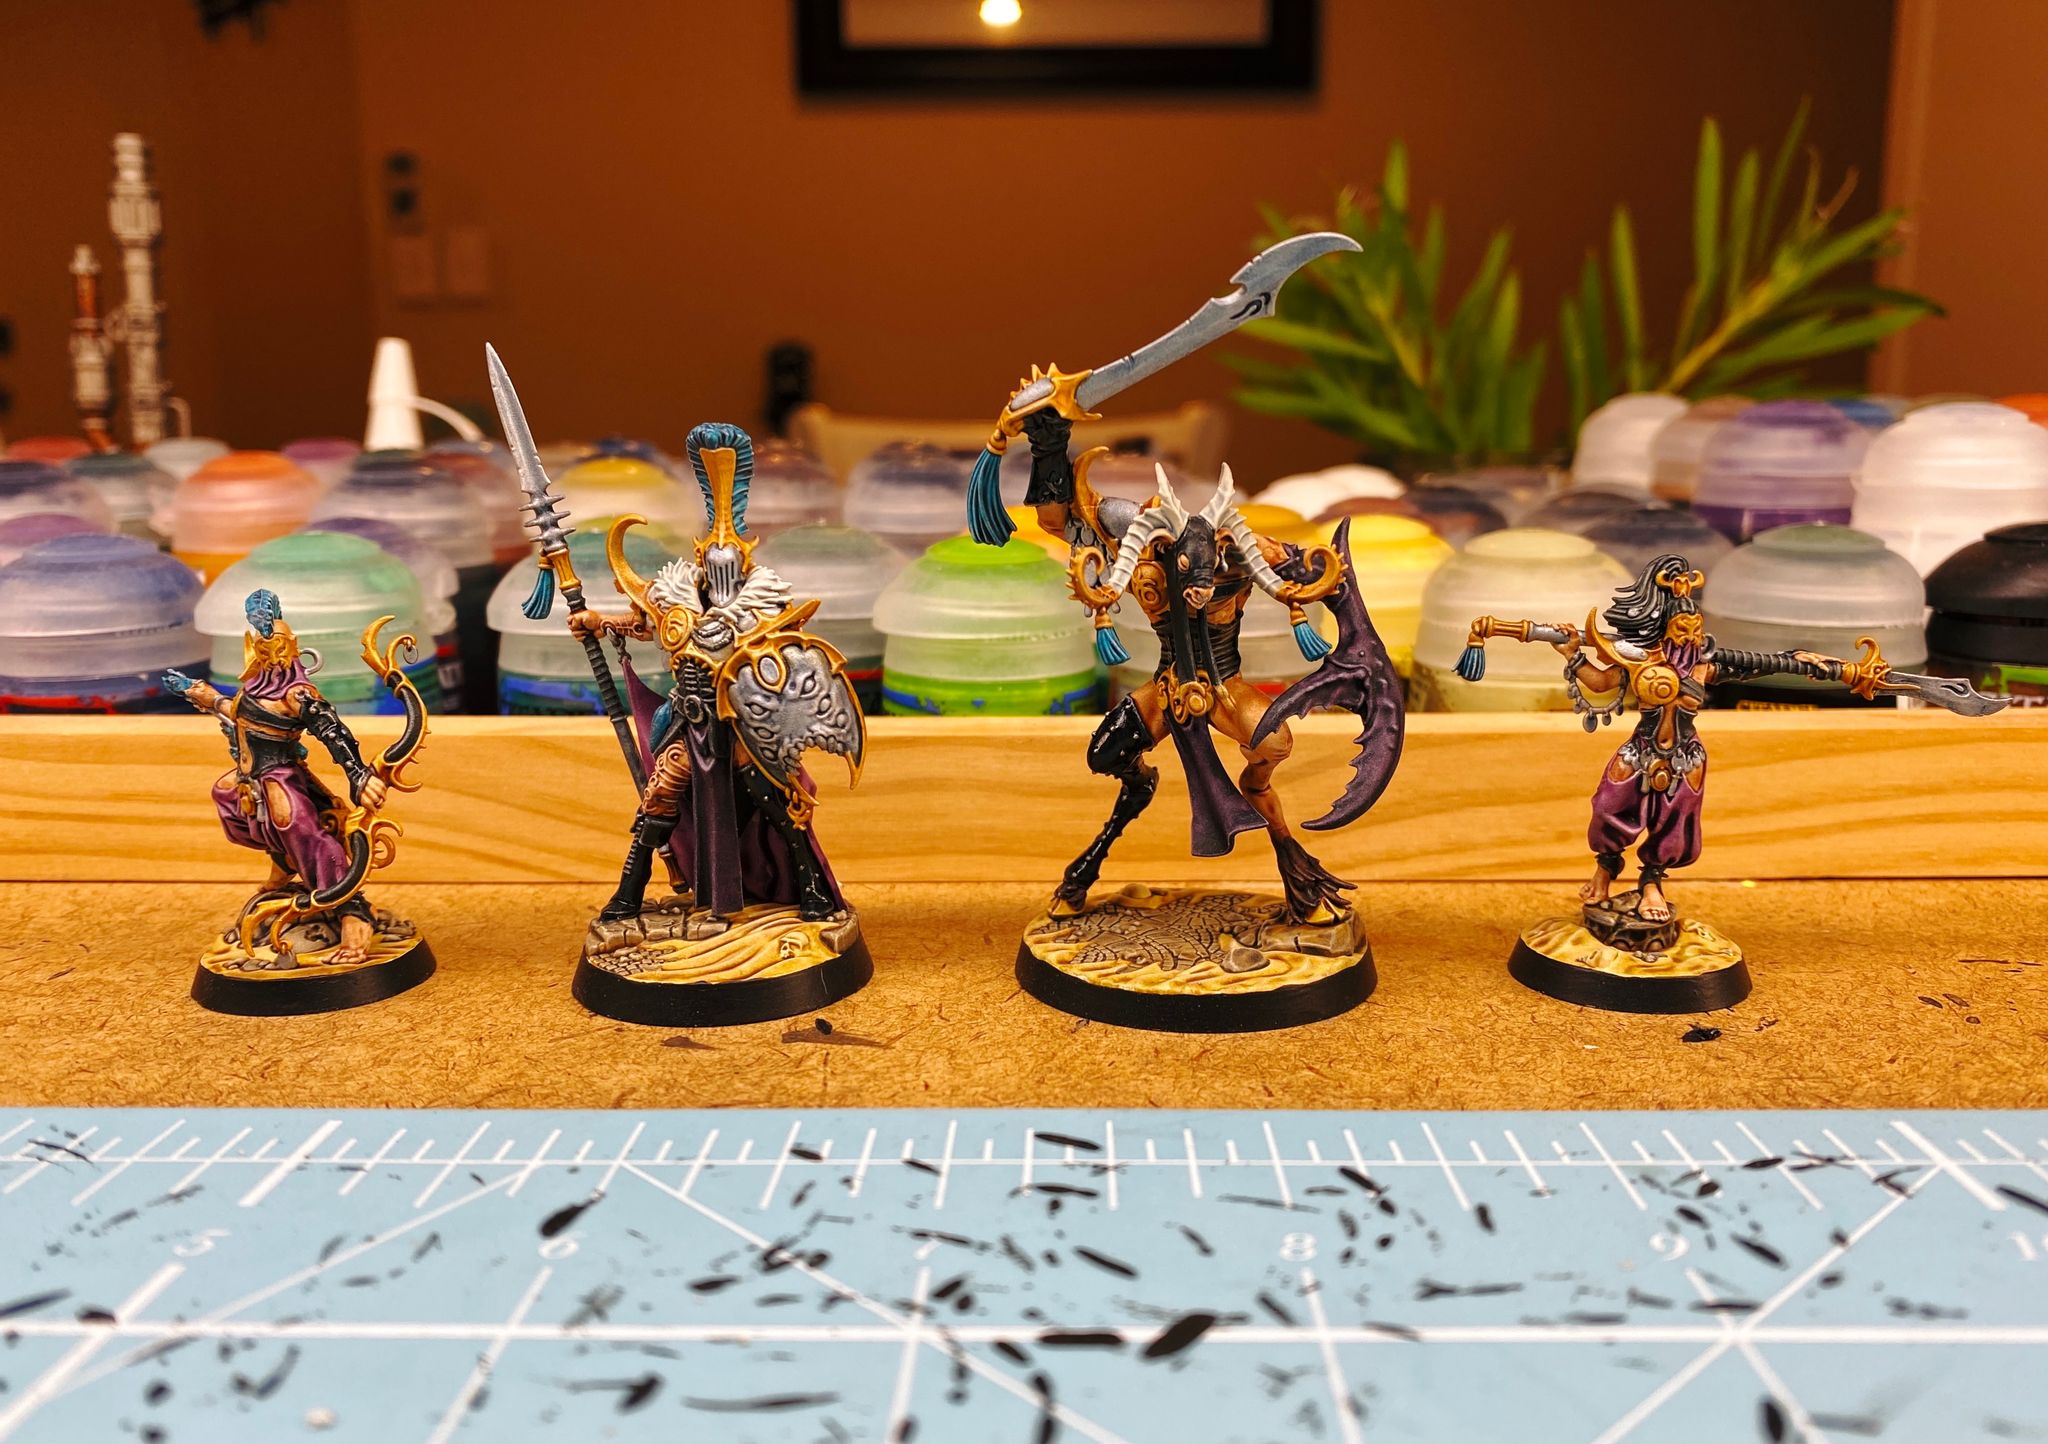 A photo of the 4 miniatures of the Dread Pageant from Warhammer Underworlds: Direchasm. 2 are human, male and female, both in puffy purple Middle-Eastern type pants, black corsets split down the front, and with gold masks on. He has an ornate bow, she is holding a glaive over her shoulders. The 3rd looks human but much taller, with a studded PVC-clad leg and holding a spear and shield with 3 sets of eyes. Last is is a beastman with a massive claw for an arm and wielding a sword, he also has a PVC-clad leg.